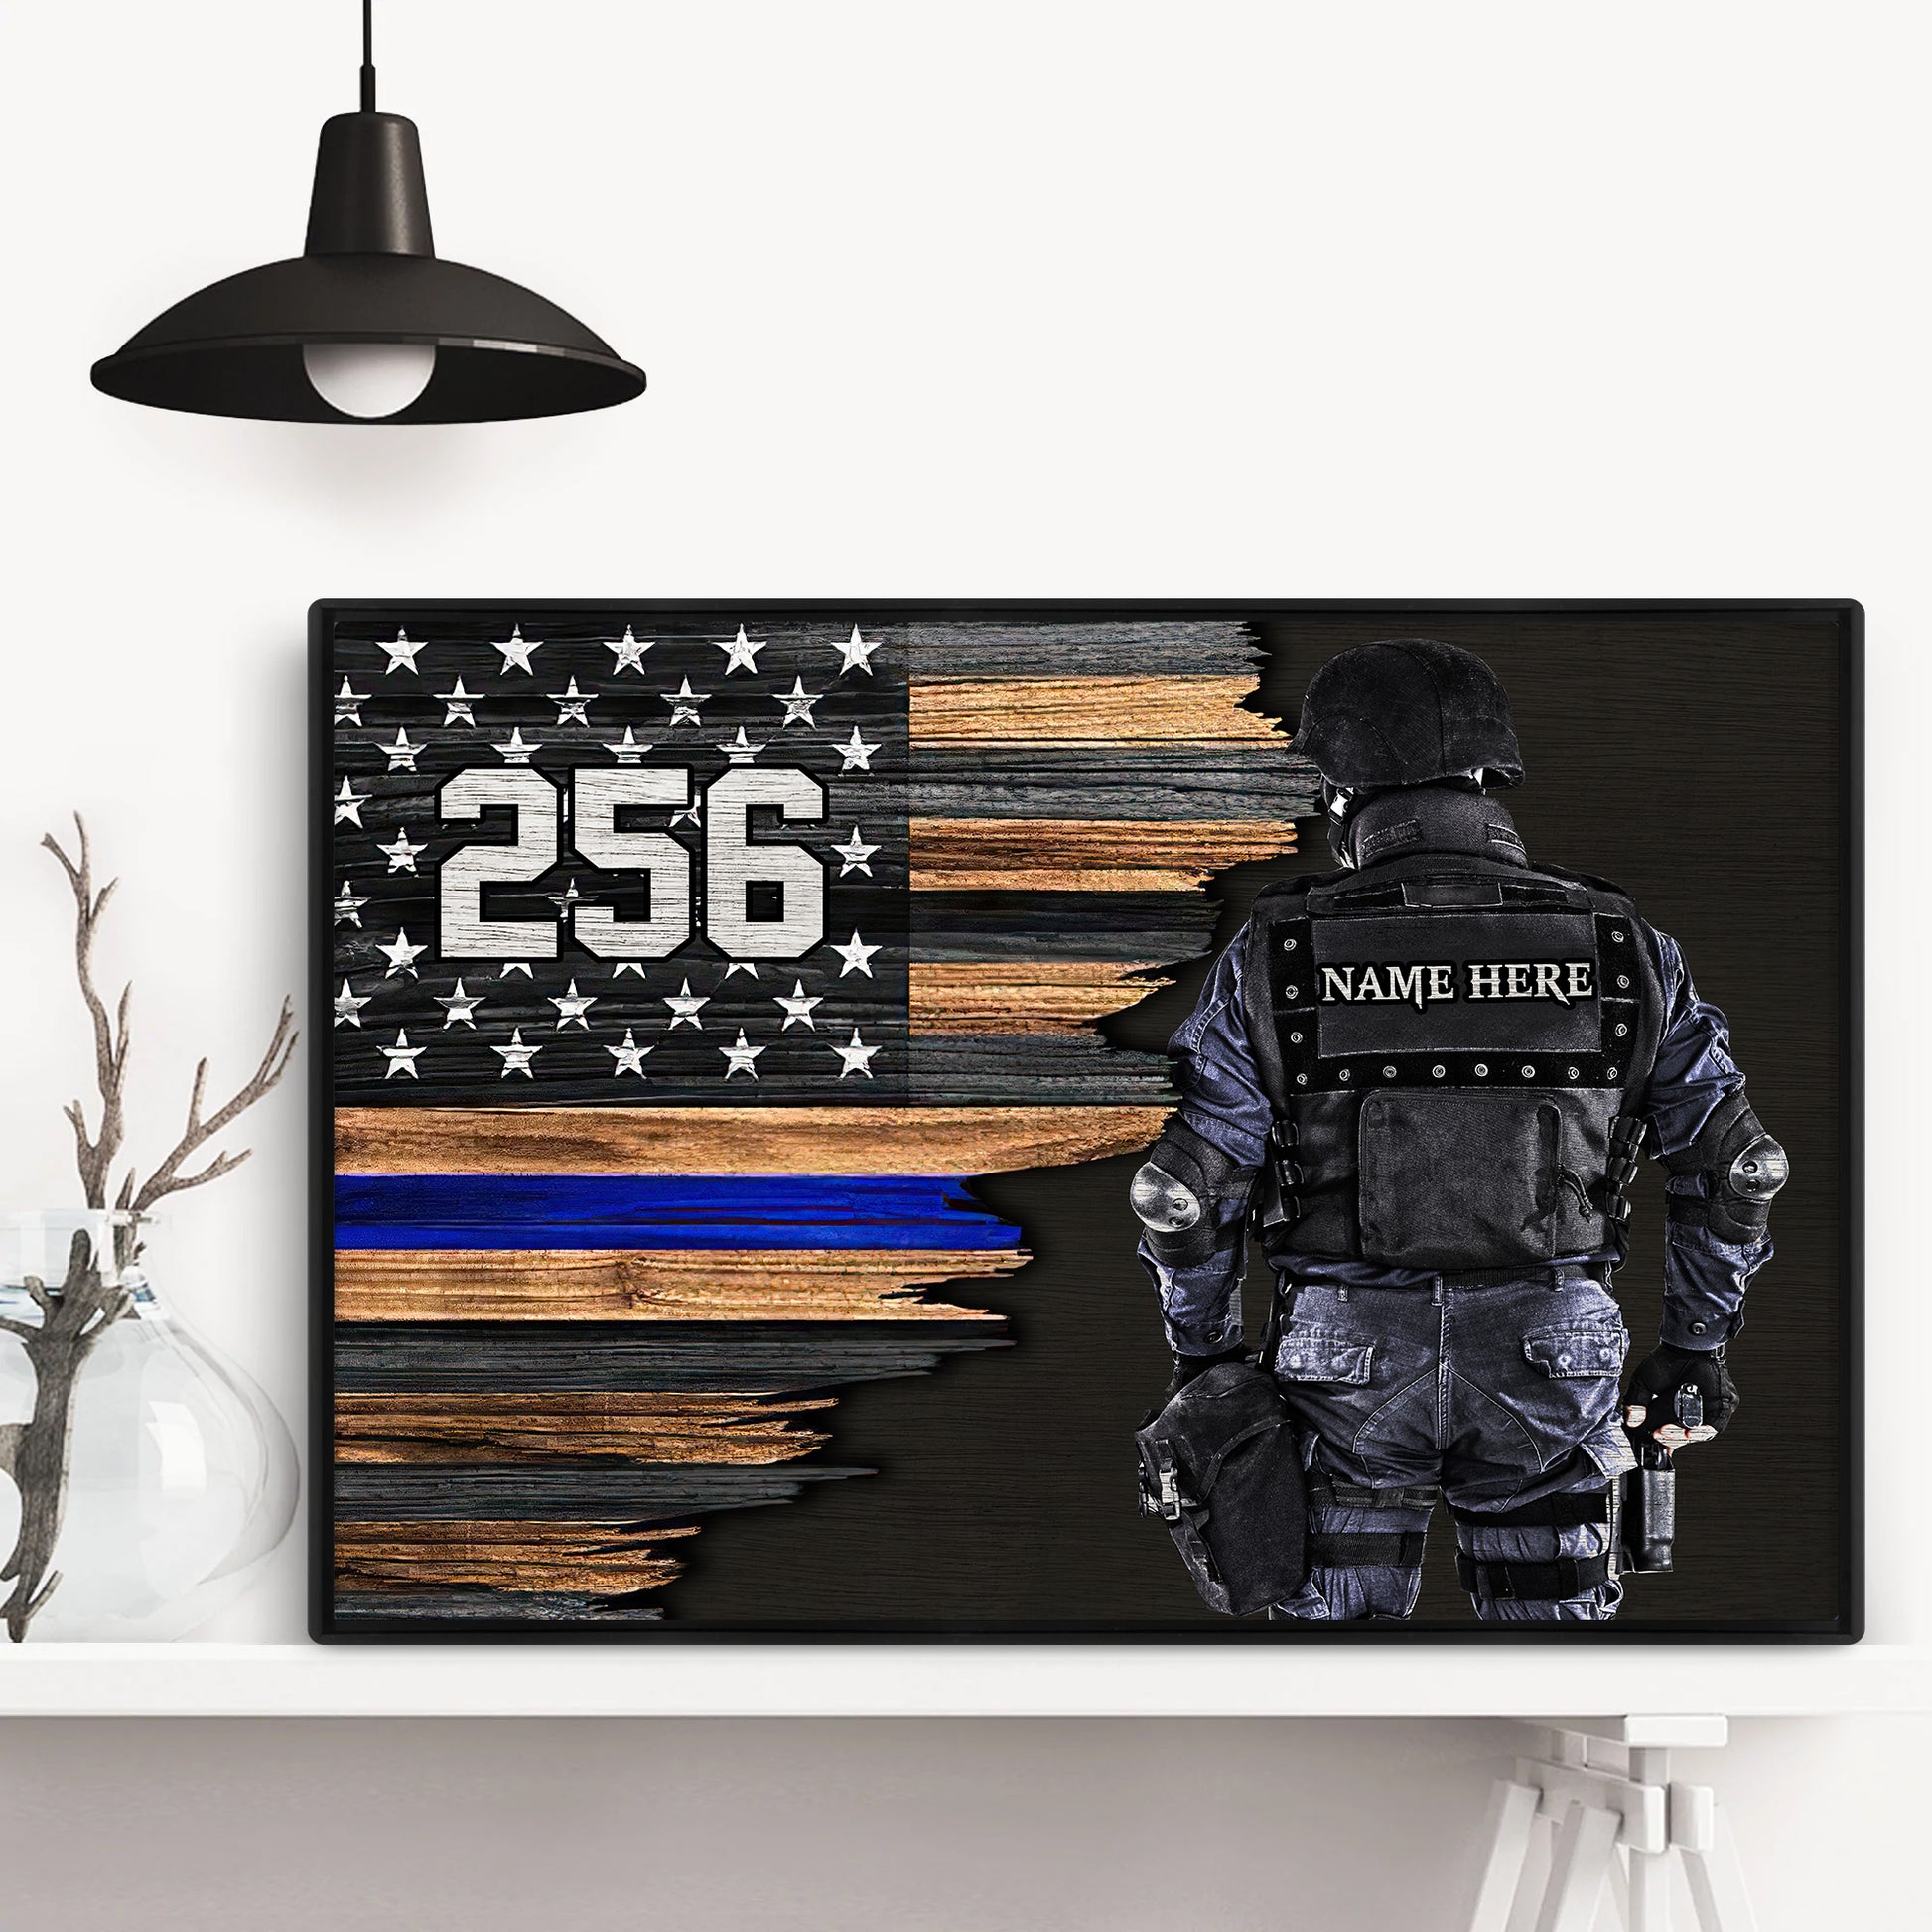  Thin Blue Line Wall Art Print - Law Enforcement Prints - Police  Officer Gifts - Police Academy Graduation - Police Officer Wall Decor - Law  Enforcement Appreciation Gift - 8x10 unframed print: Posters & Prints